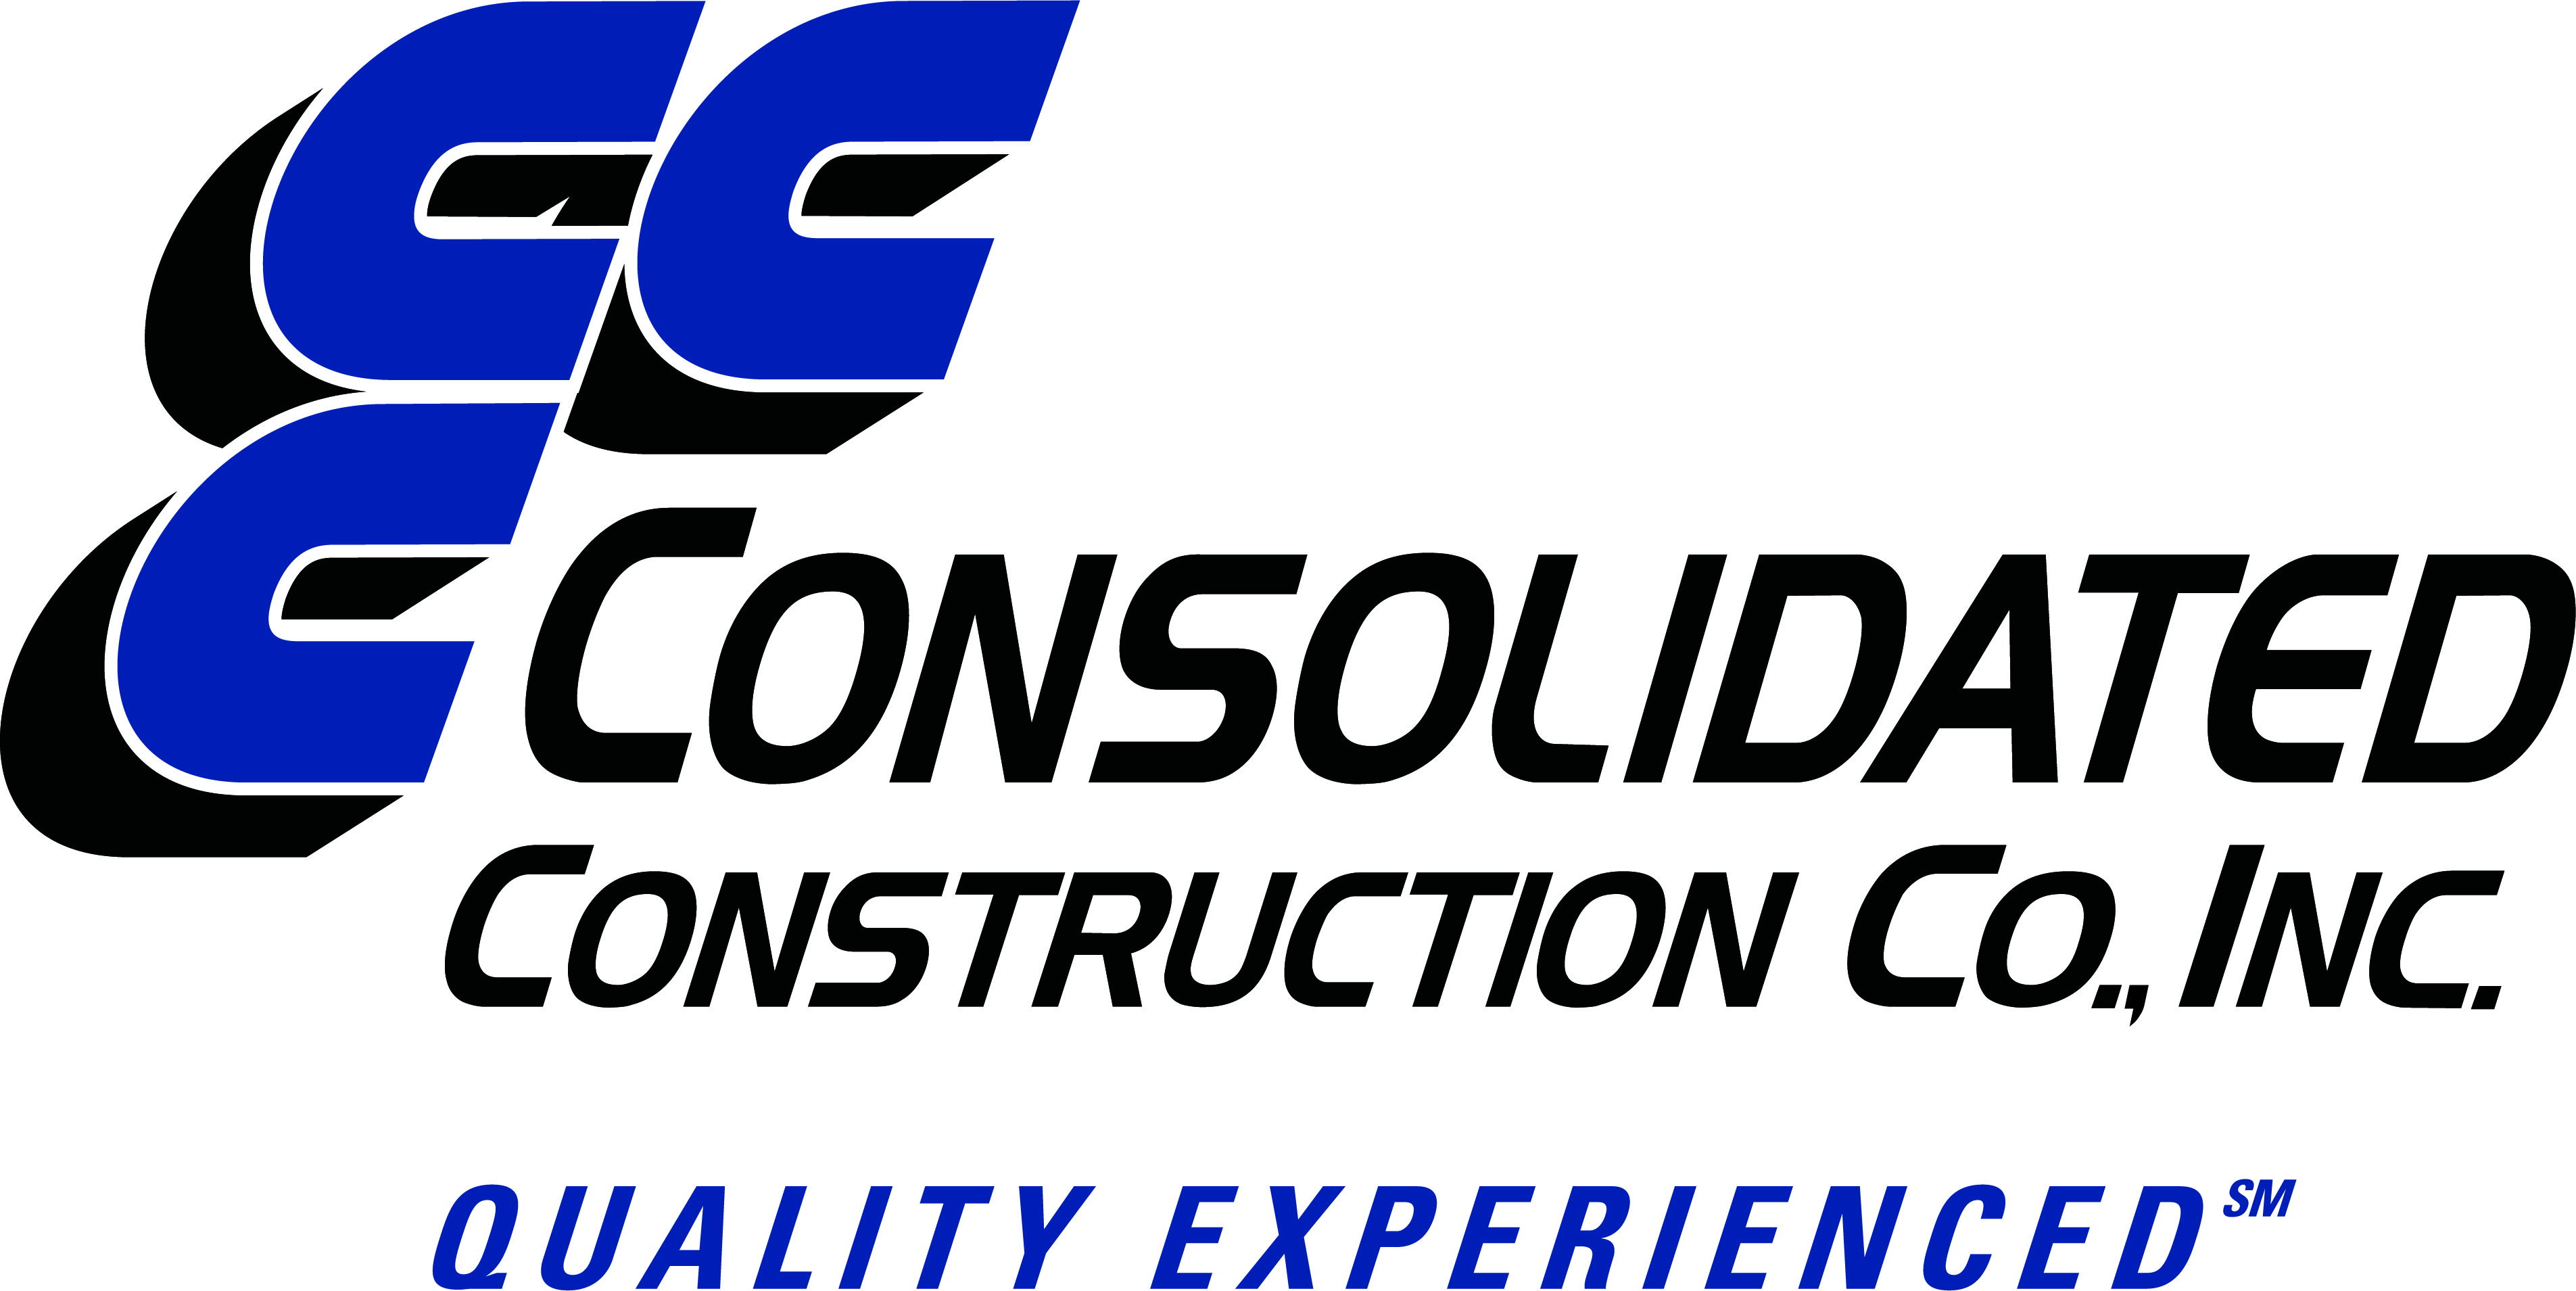 Consolidated Construction Company